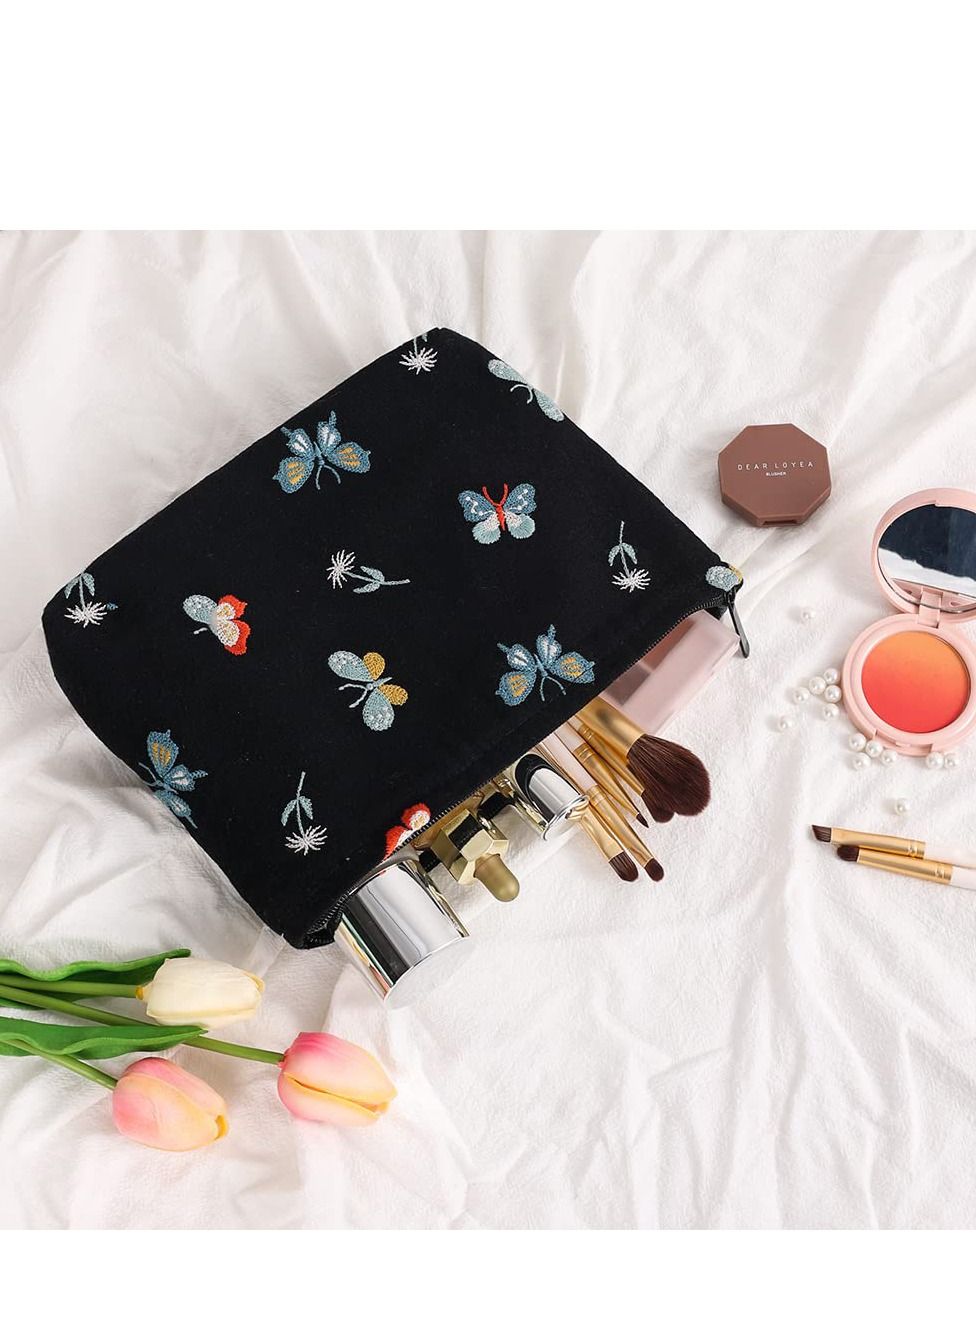 Butterfly Makeup Bag Cosmetic Bag for Women, large Capacity Canvas Makeup Bags Travel Toiletry Bag Accessories, Organizer, pouch for Women Girls Portable Toiletry Organizer Gifts, Black 